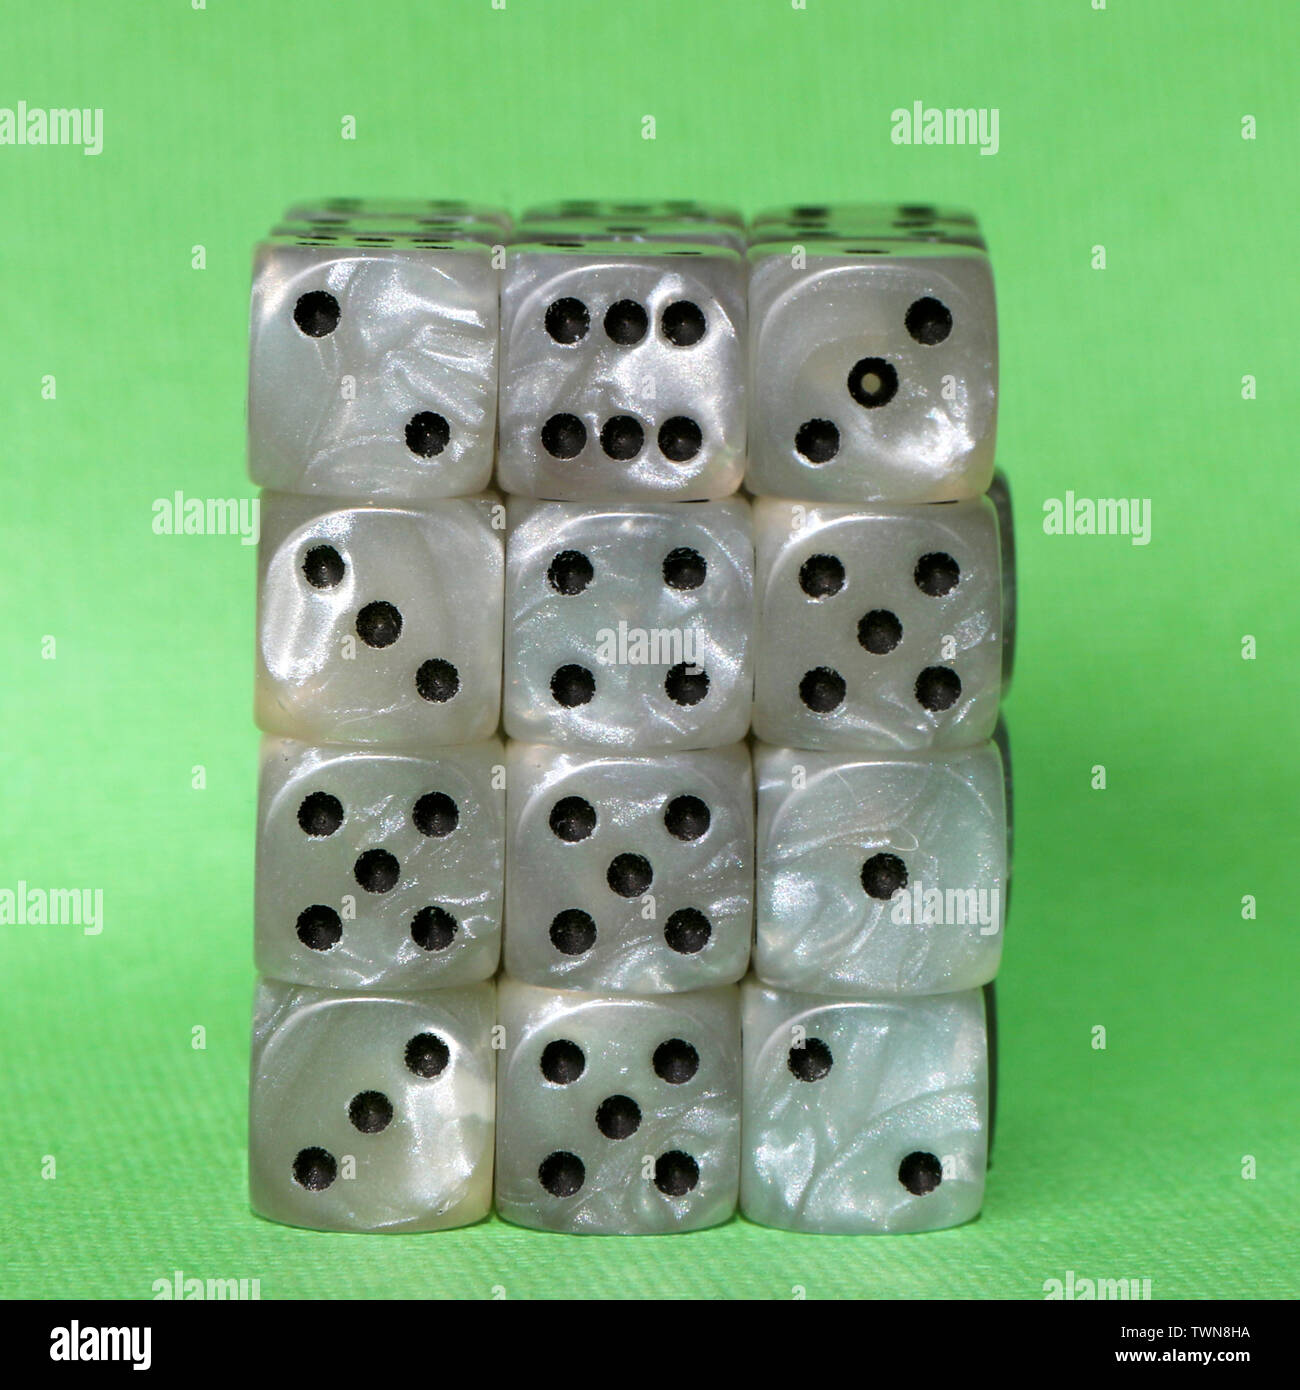 Stack of dice used for gambling. Stock Photo